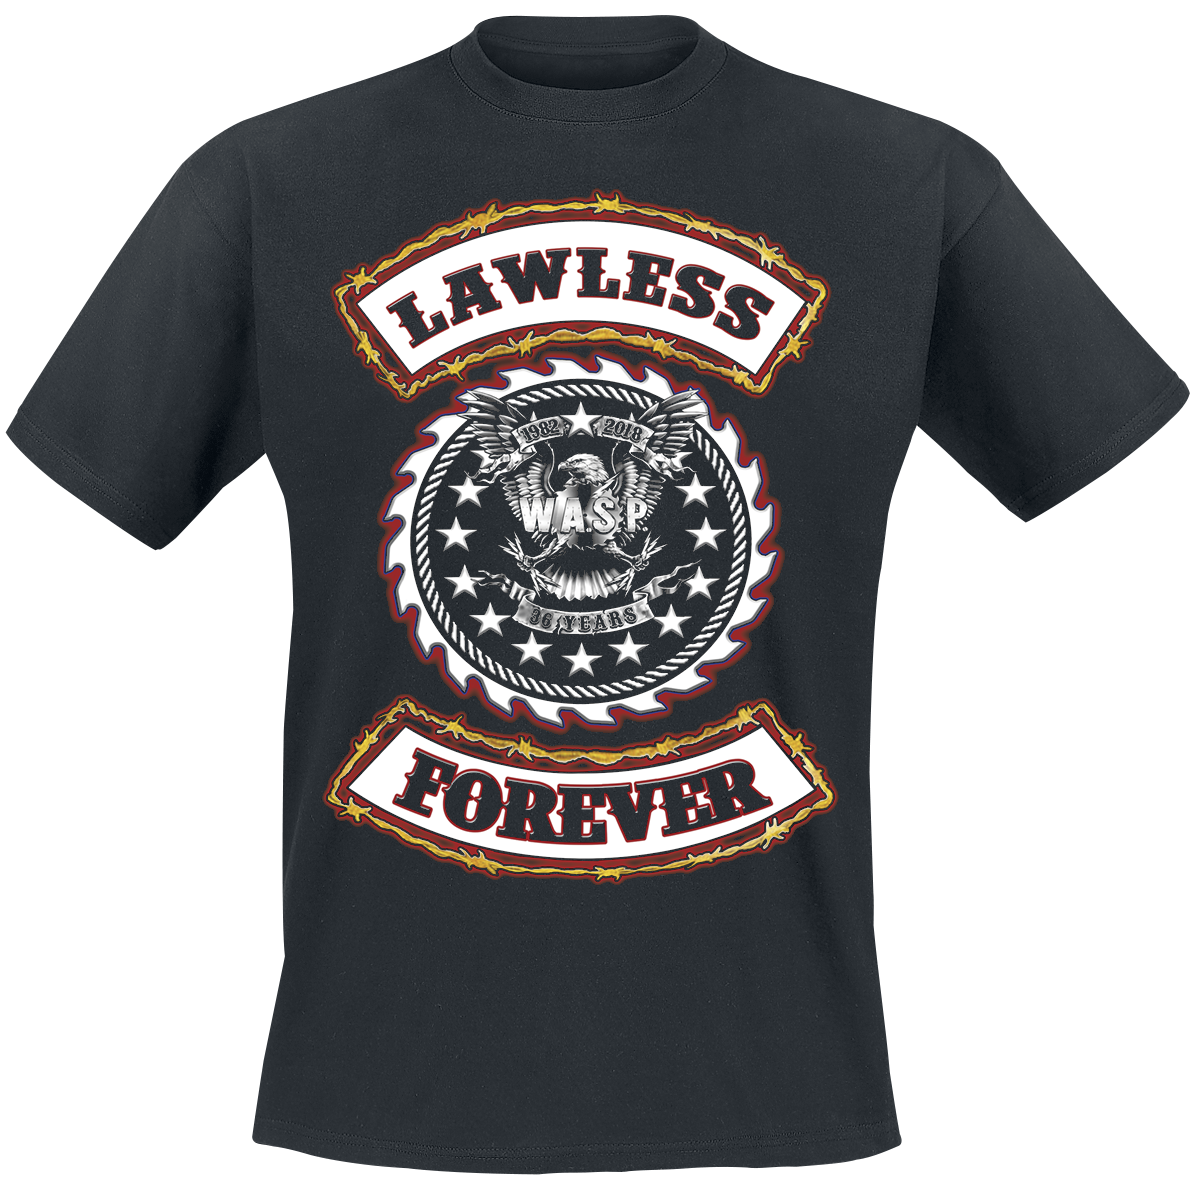 W.A.S.P. - Lawless Forever - T-Shirt - black image